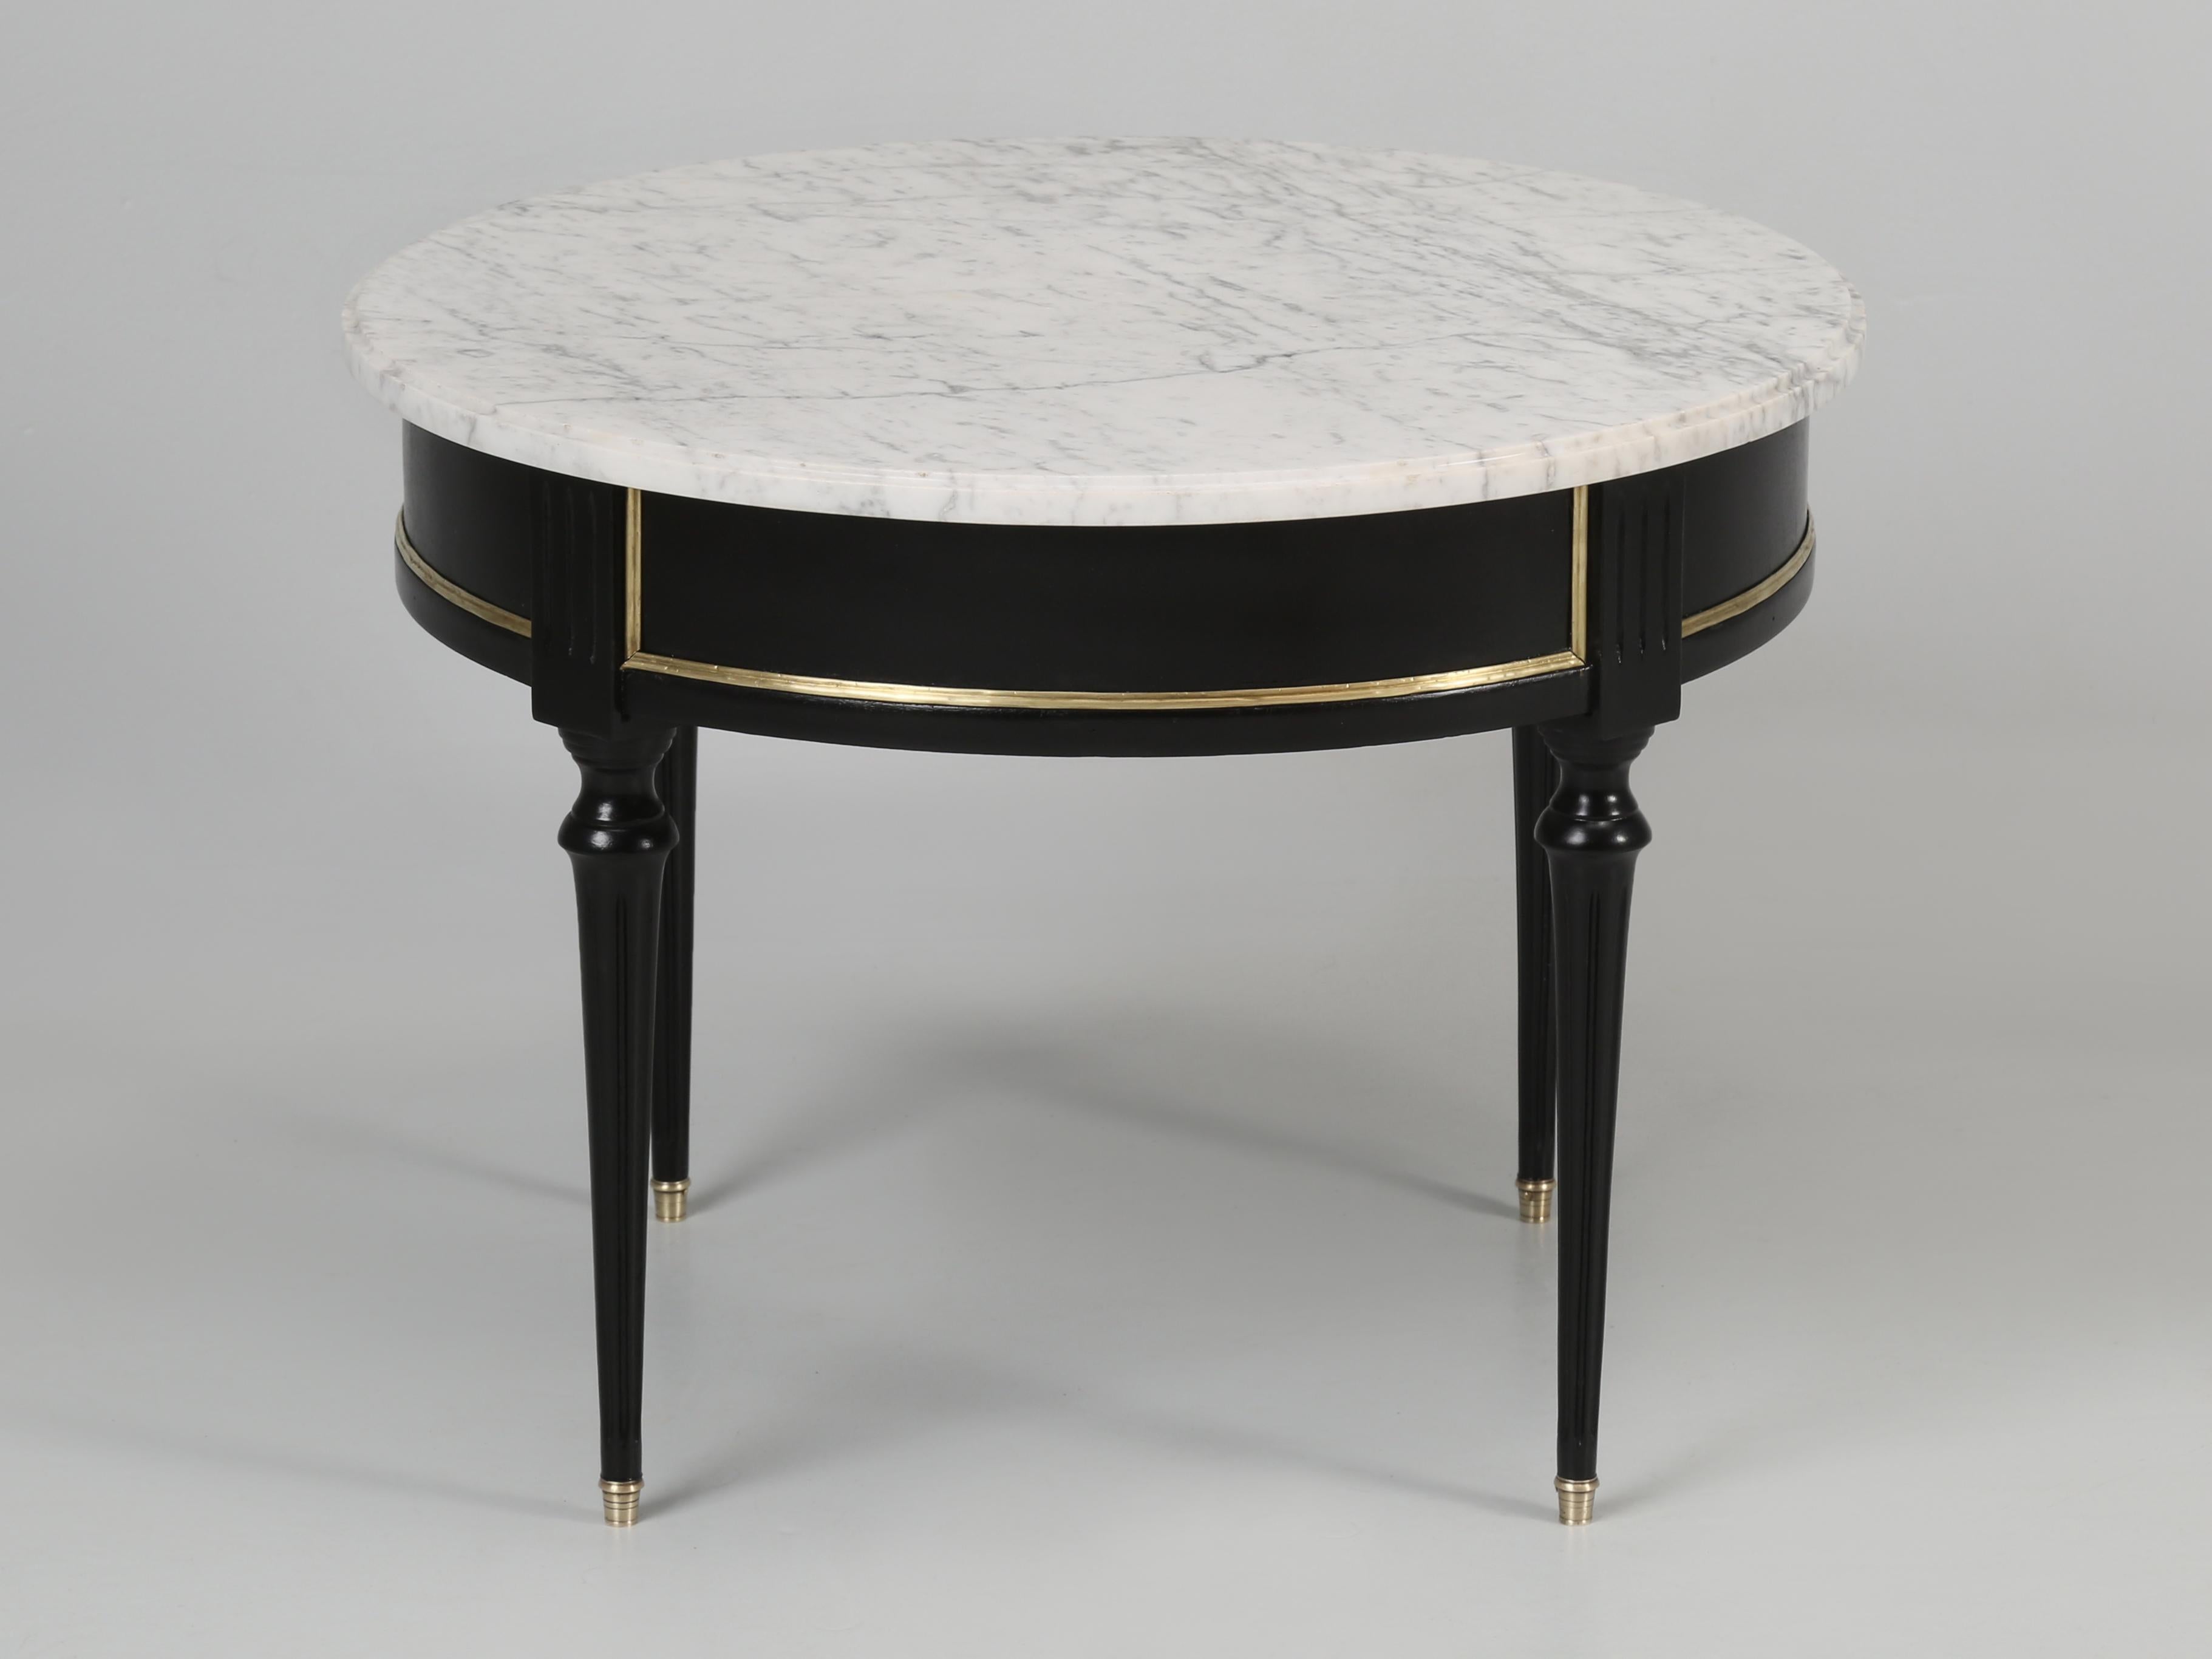 Vintage French Coffee table in the style of Louis XVI with a carrara marble top. The wood was carefully sanded and ebonized in our Old Plank finishing department, so that you can still see the grain of the wood on the Louis XVI style coffee table.